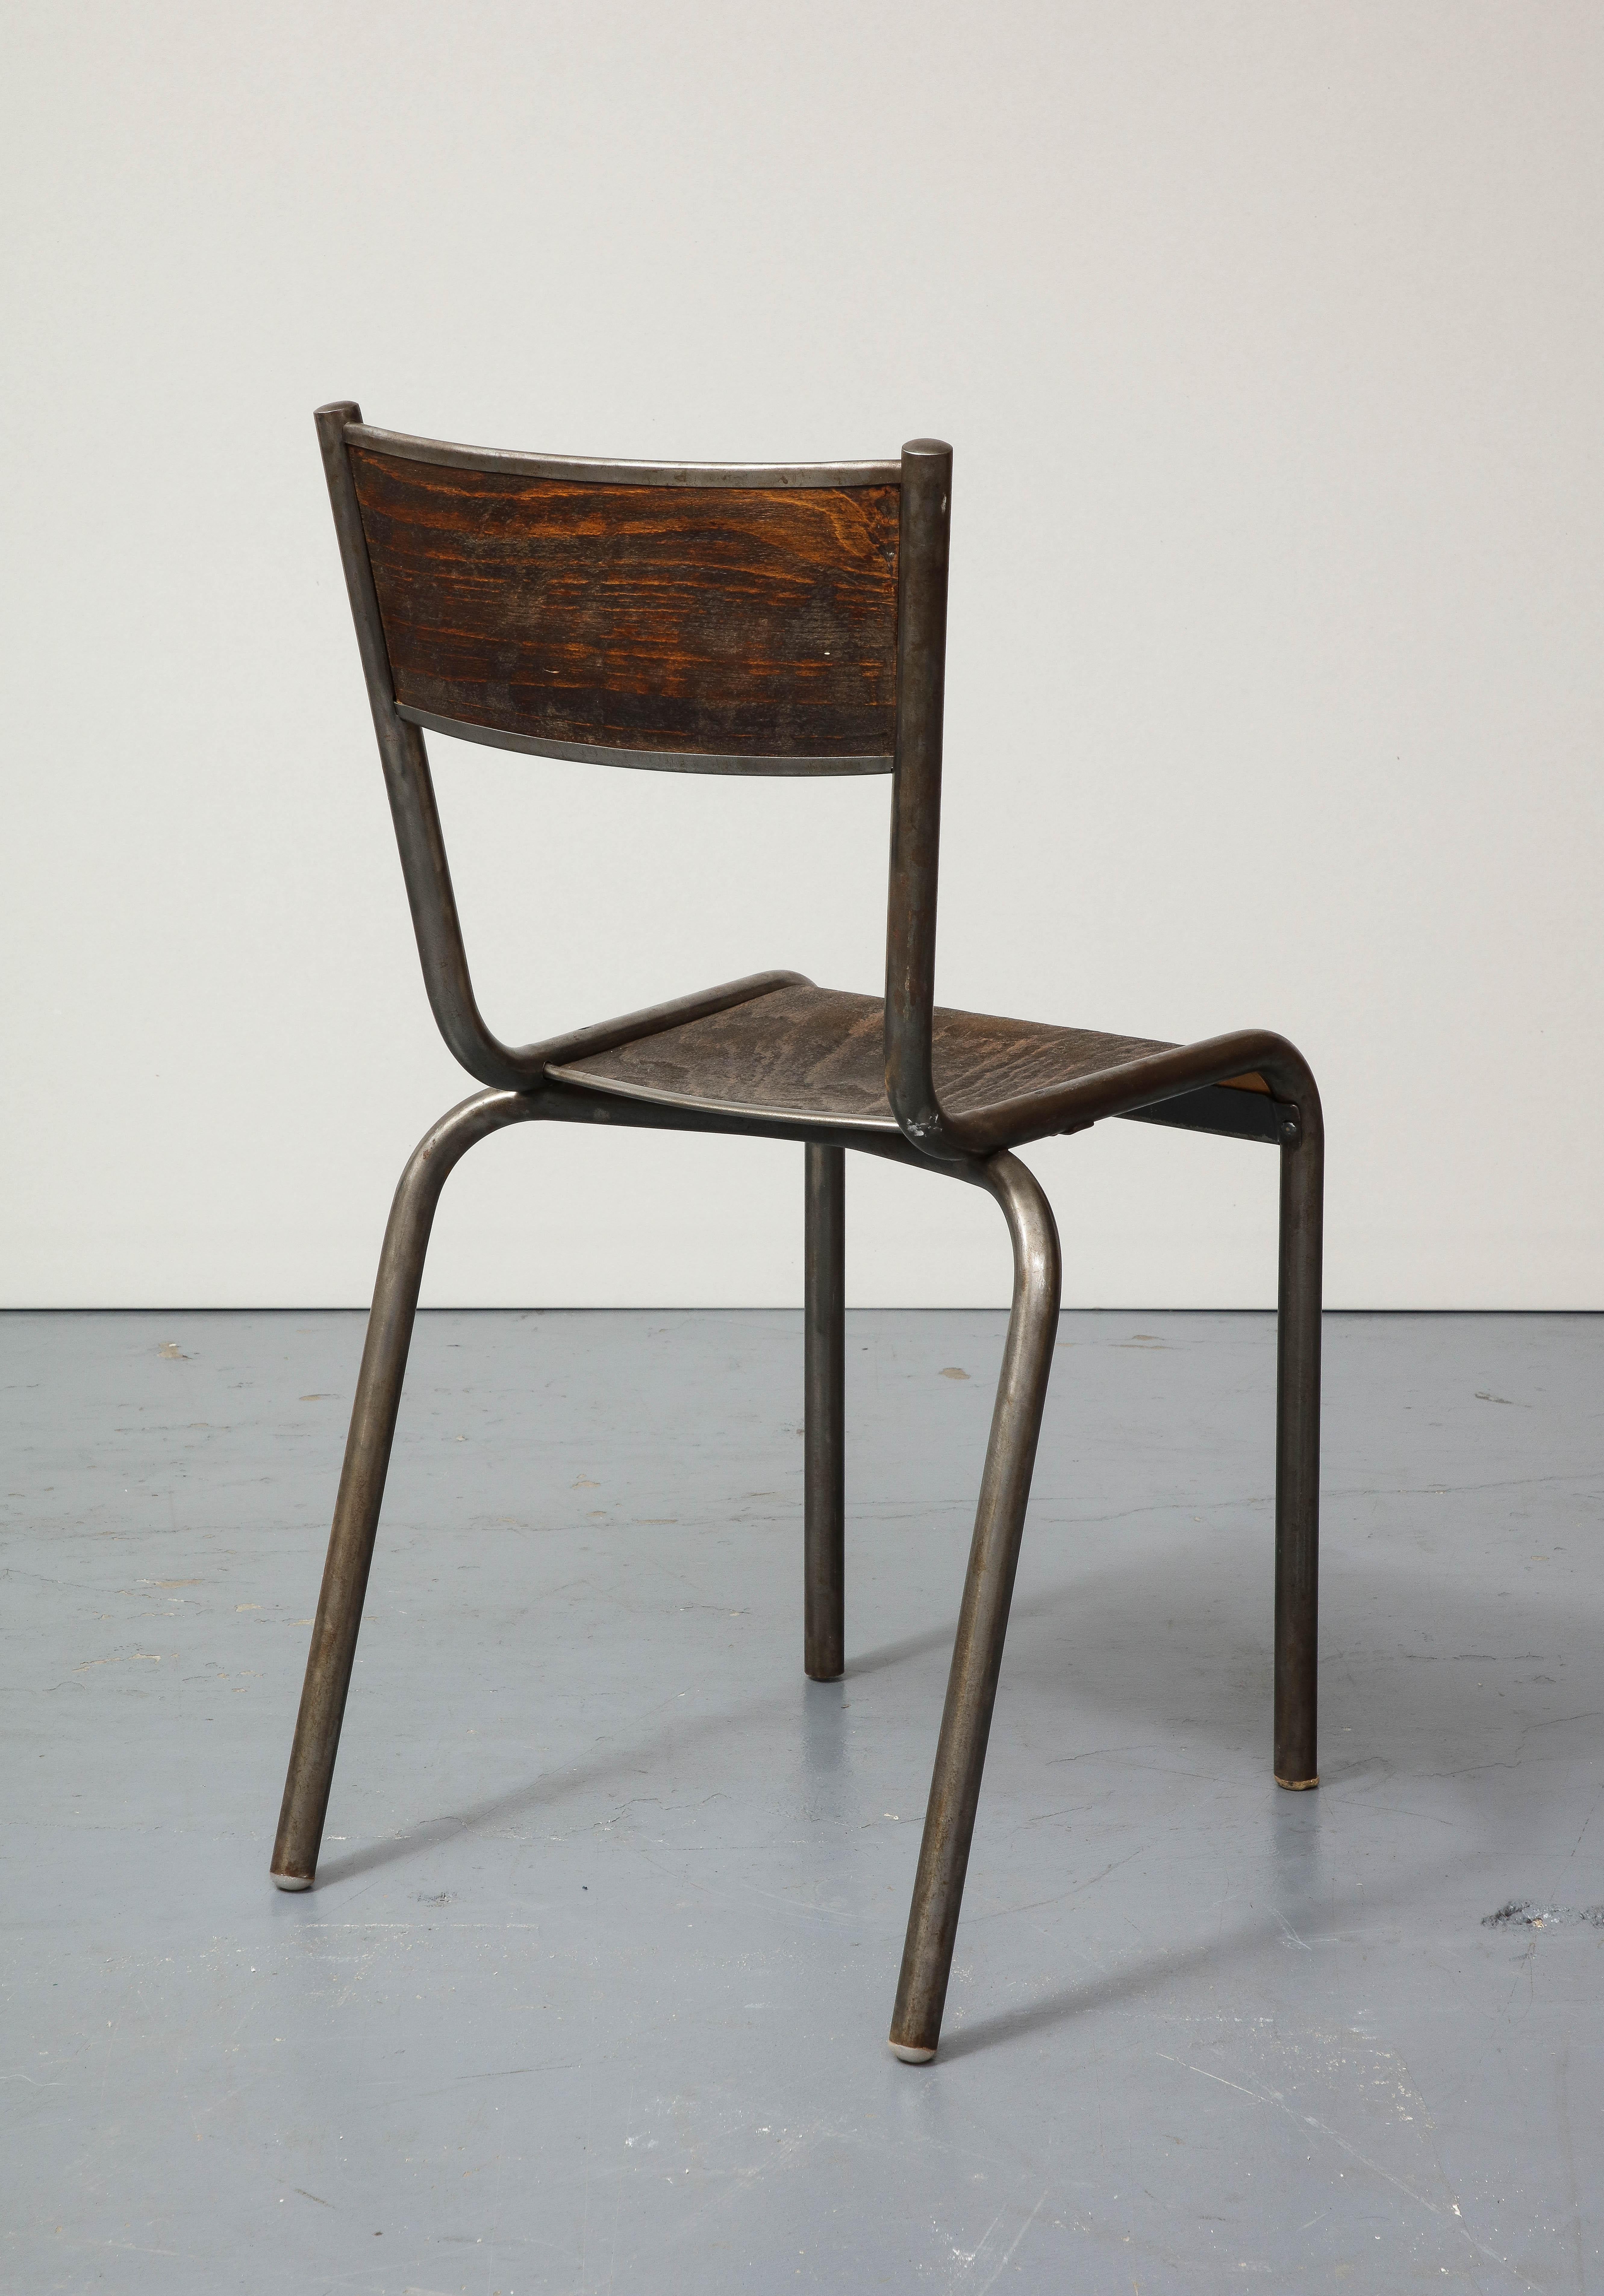 Polished Steel and Bentwood Chair, France, c. 1940 For Sale 1